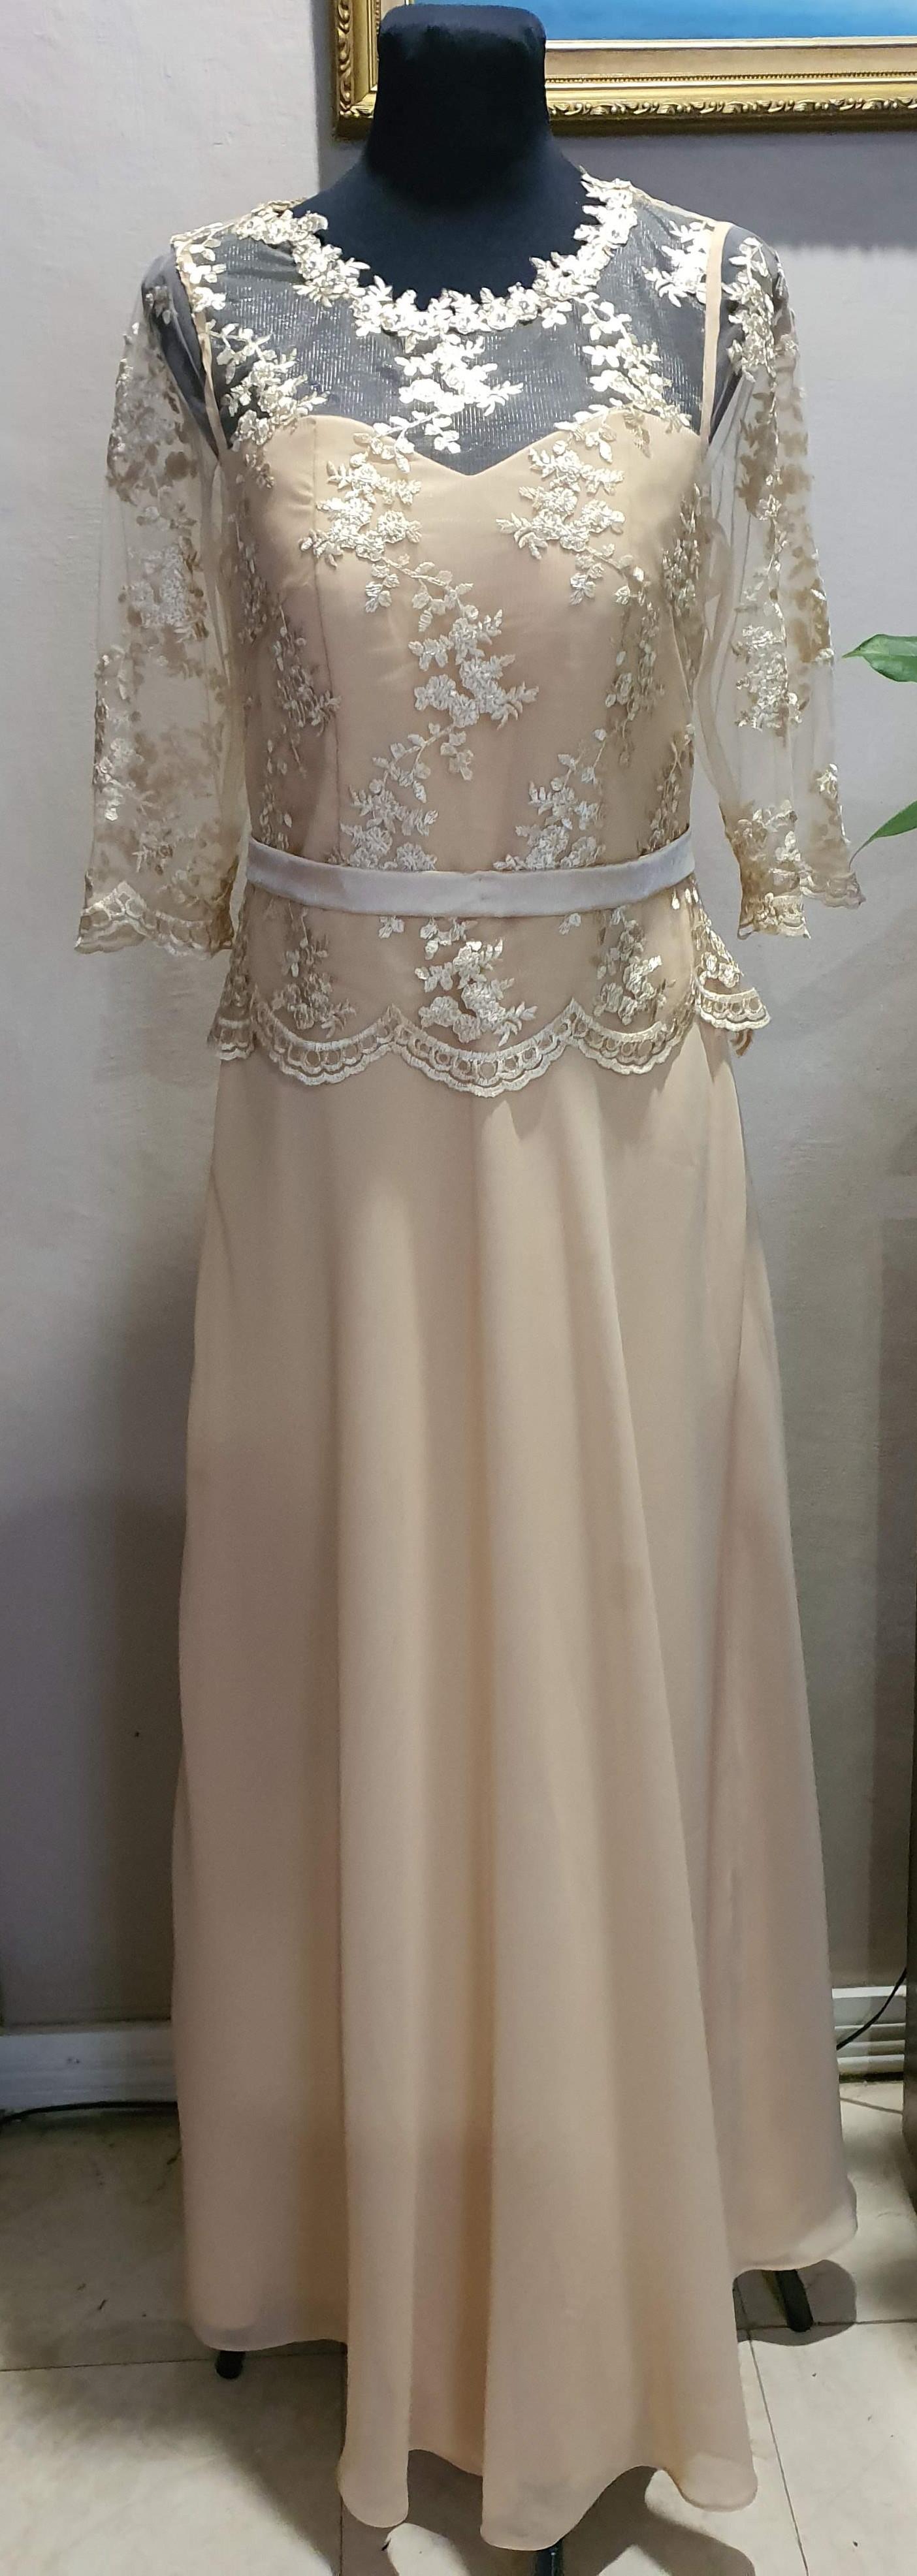 gowns for wedding principal sponsors